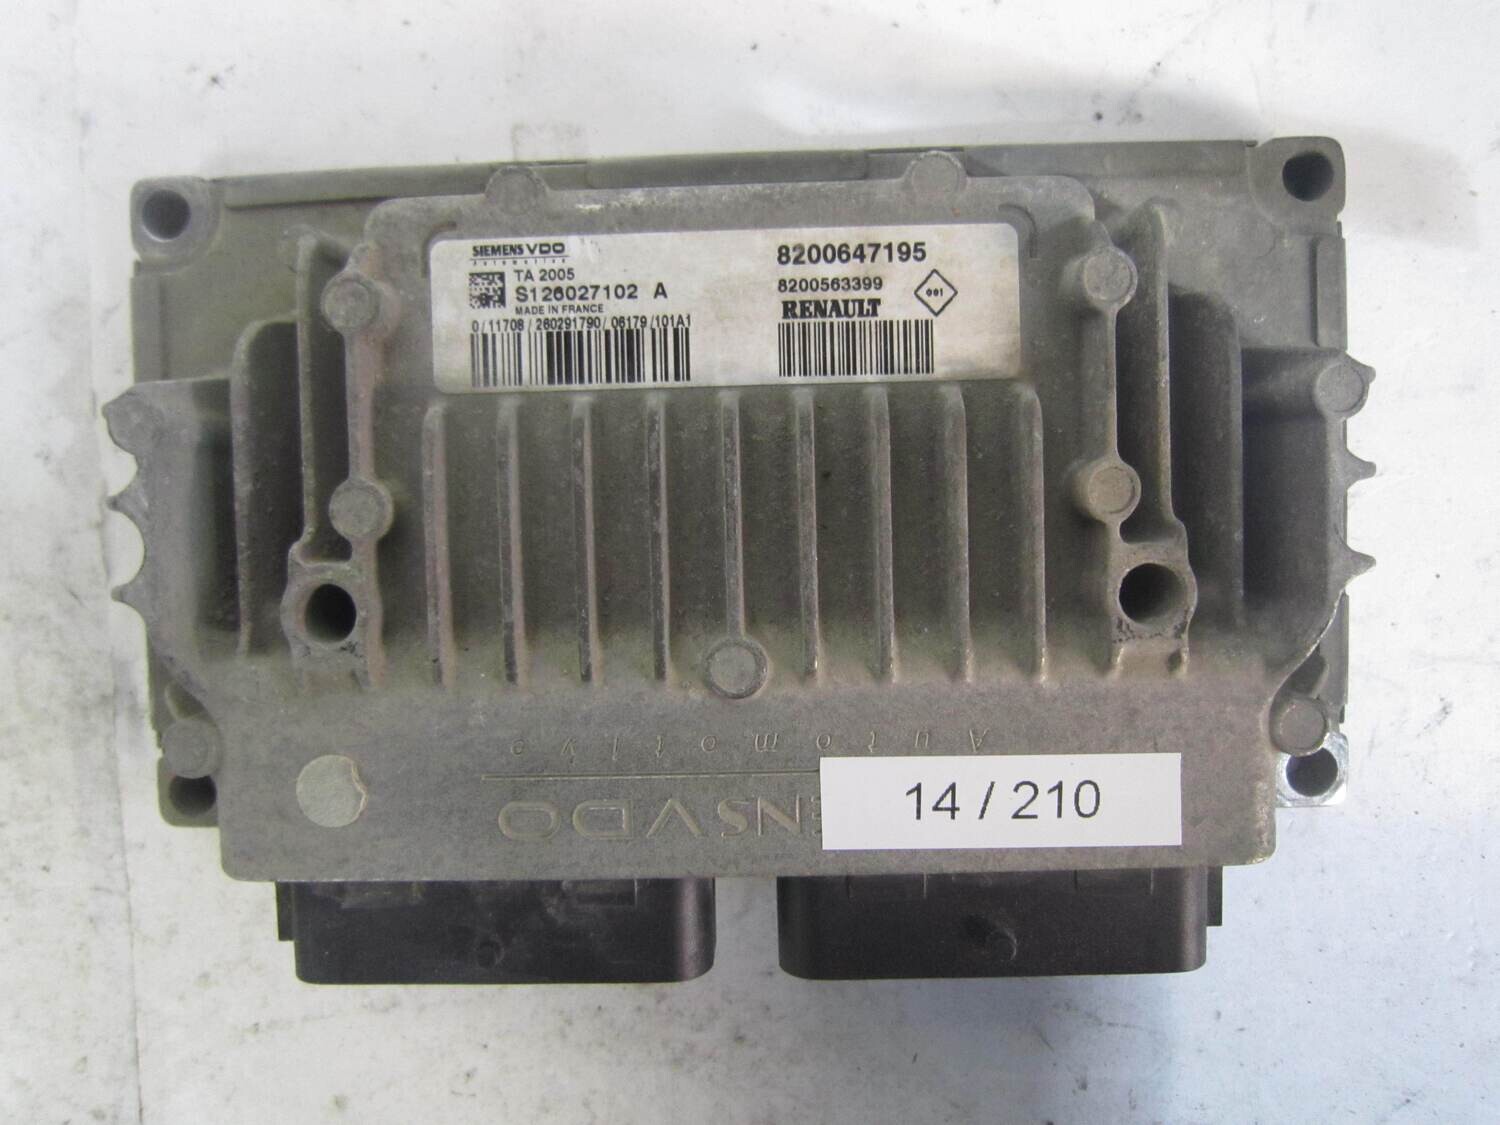 14-210 Centralina Cambio Automatico Siemens S126027102 A S126027102A 8200647195 8200563399 T2005 S122751101 A1 RENAULT VARIE